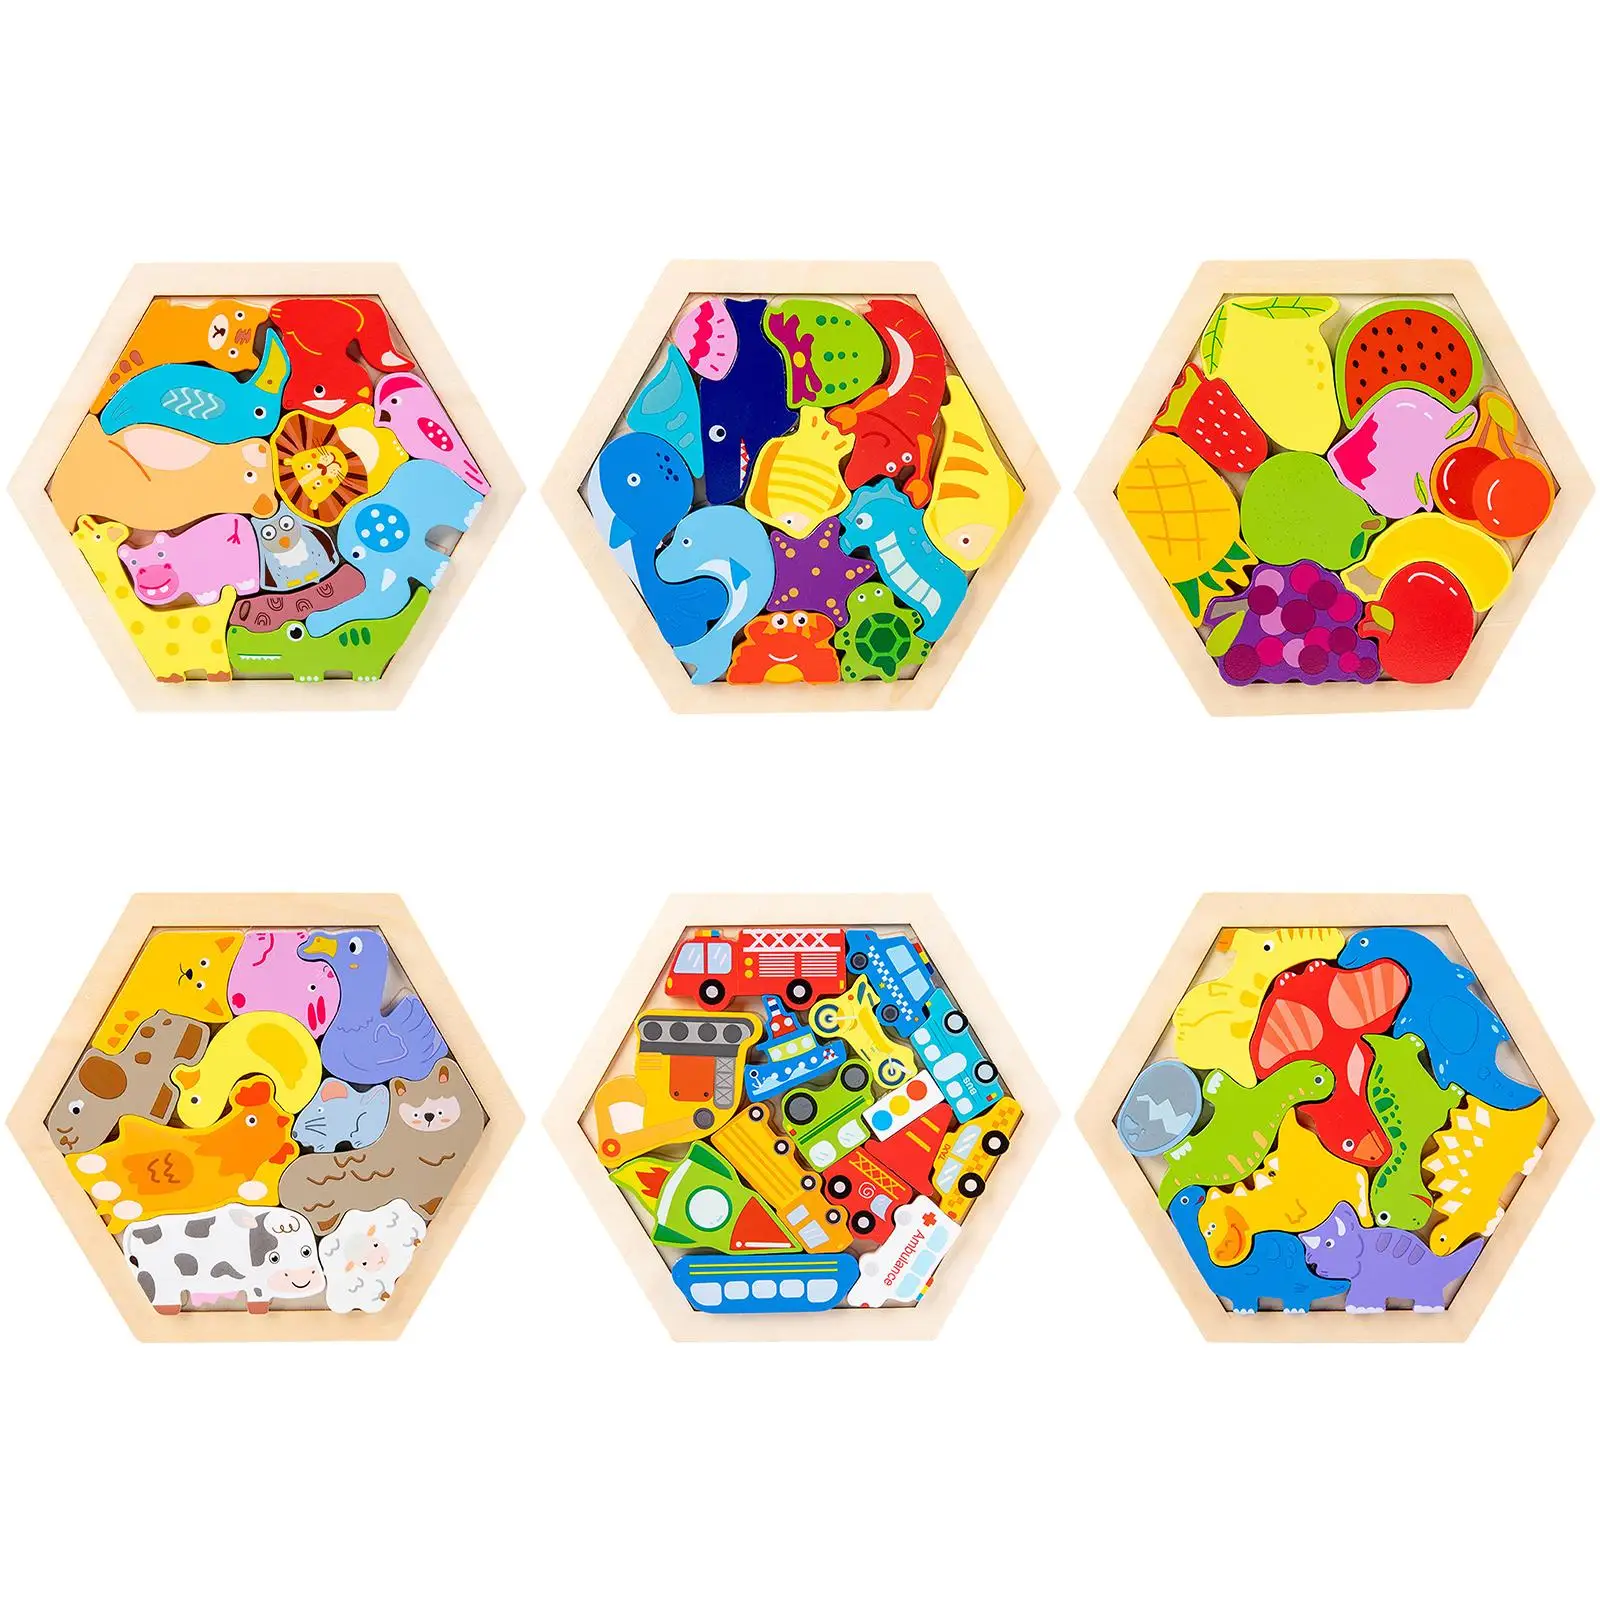 

3D Wooden Jigsaw Puzzles Educational Toy Sorting Stacking Blocks Teaching Aids Education Learning Toy Age 4+